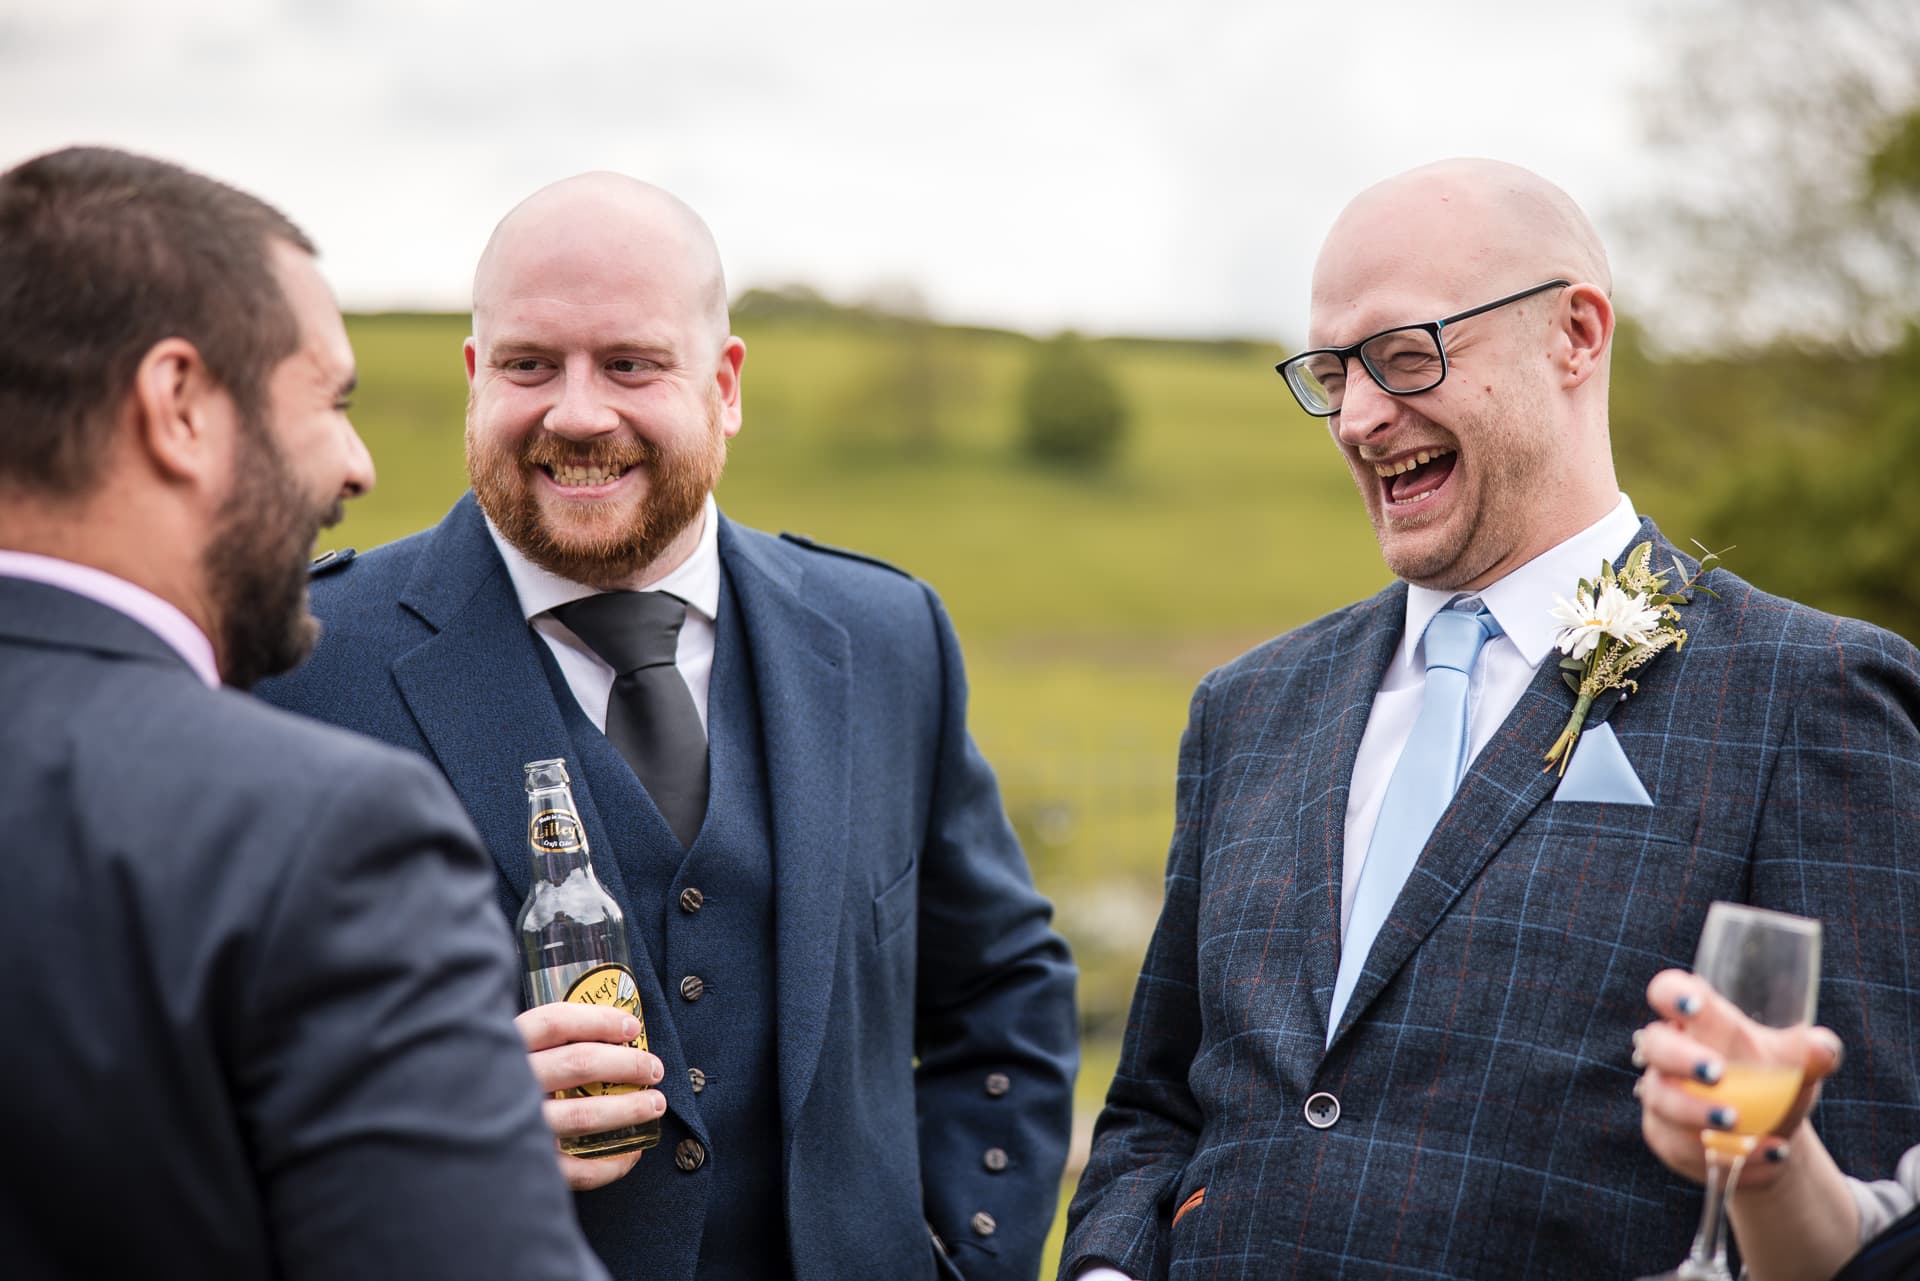 Groomsman and friends having a laugh